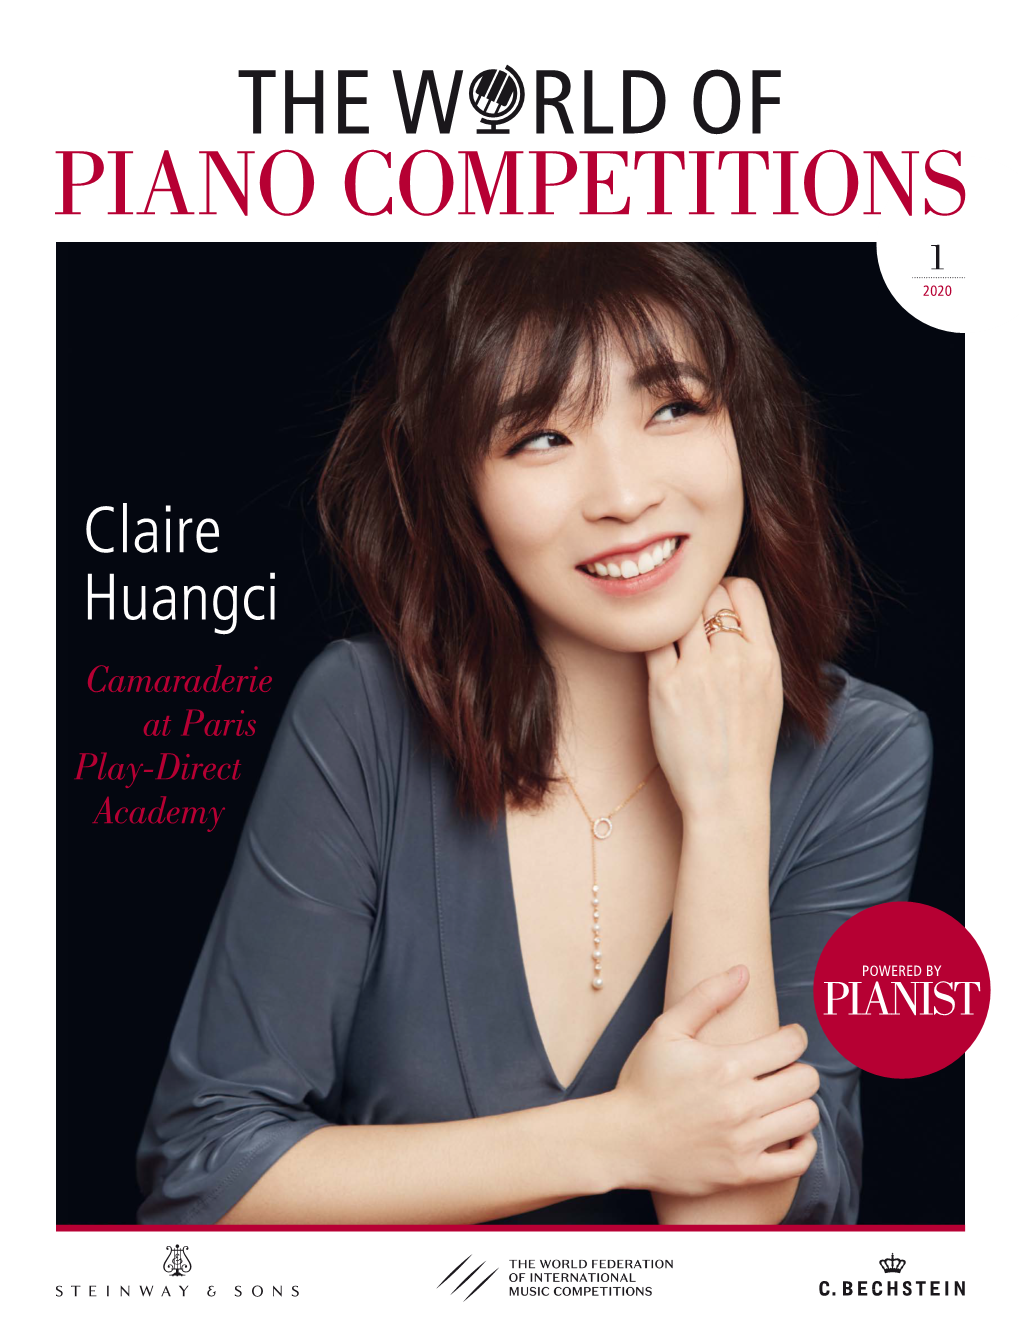 The World of Piano Competitions